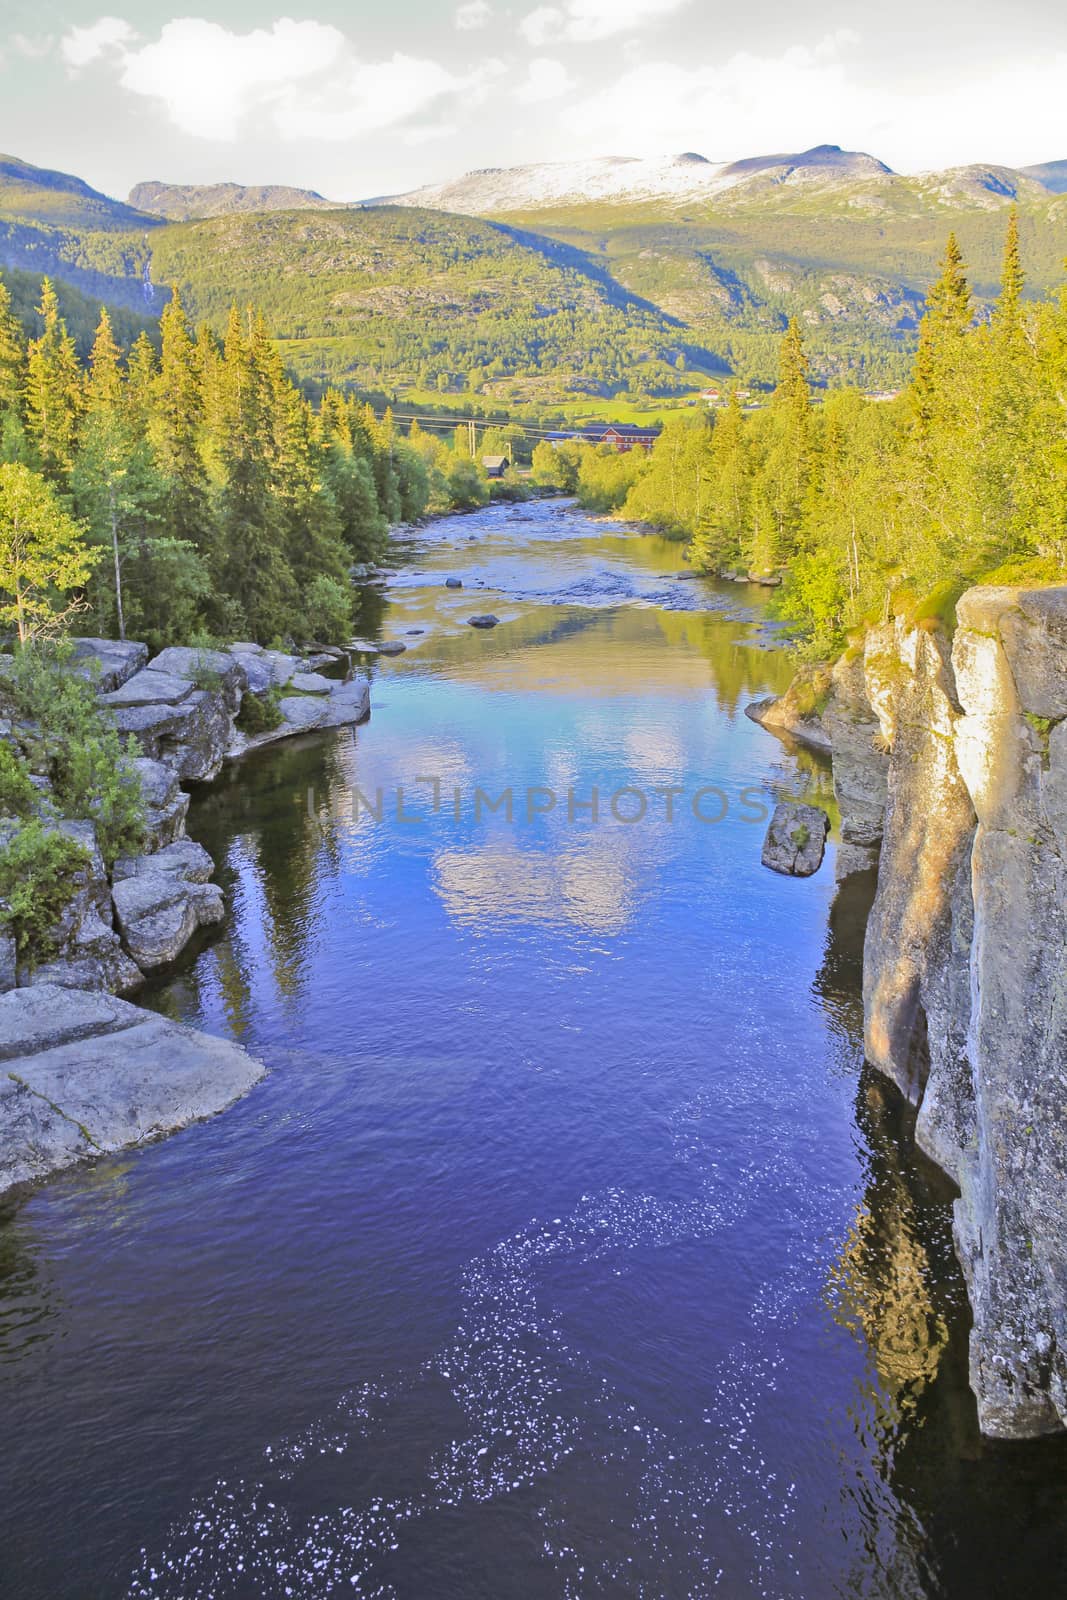 River of the beautiful waterfall Rjukandefossen with mountain and village views of Hemsedal, Buskerud, Norway.